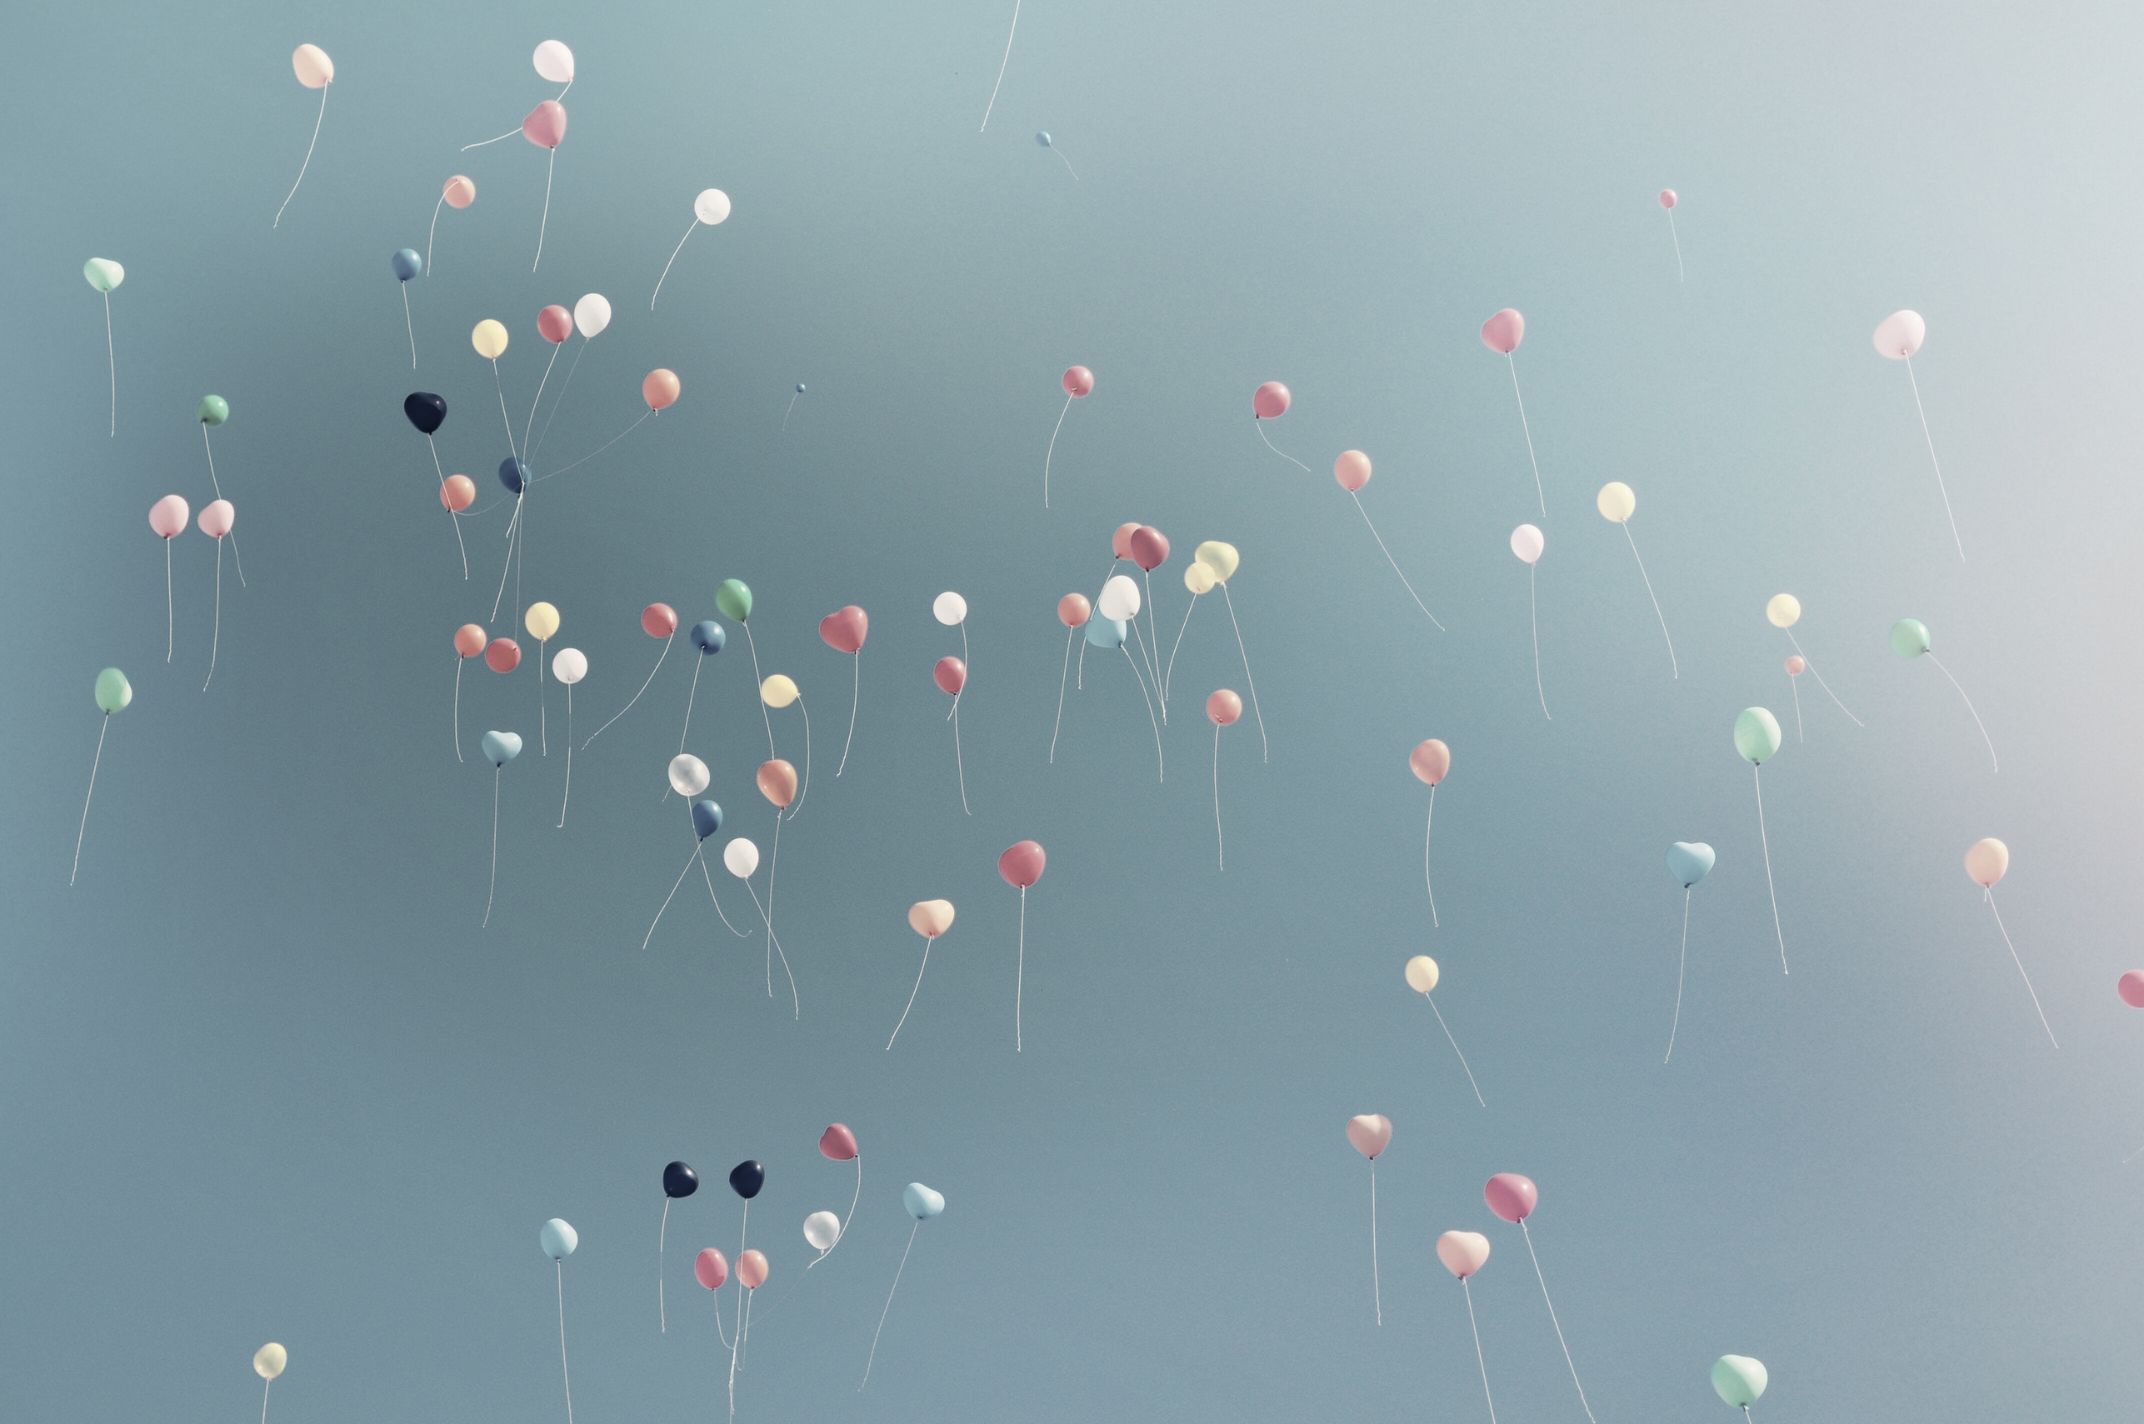 Florida to ban intentional balloon releases